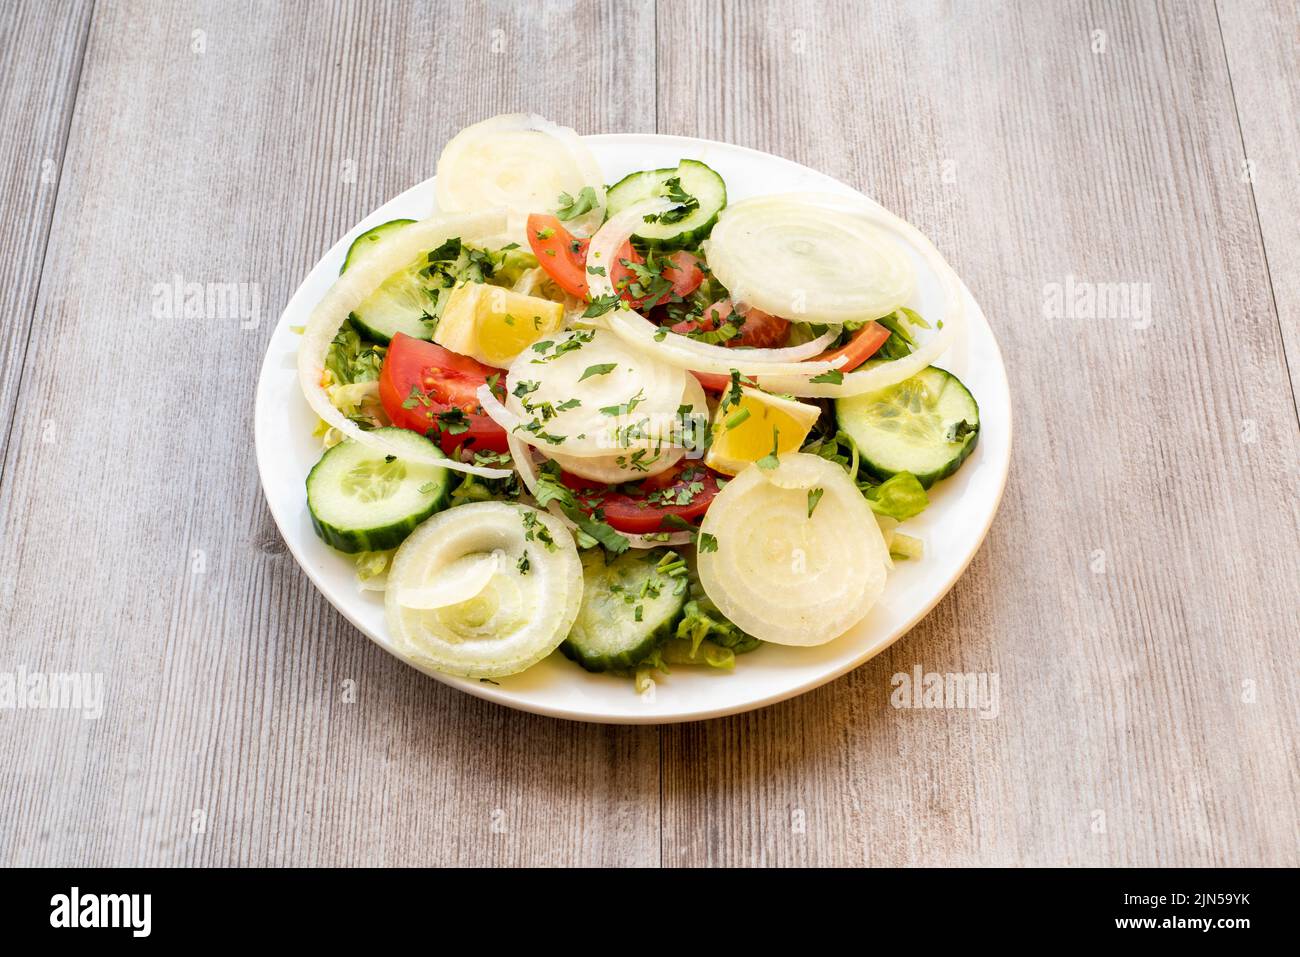 Doncaster, UK - 2019 Mar 21: Green Salad with lettuce, cucumber, onion and tomato from Goa Indian Stock Photo